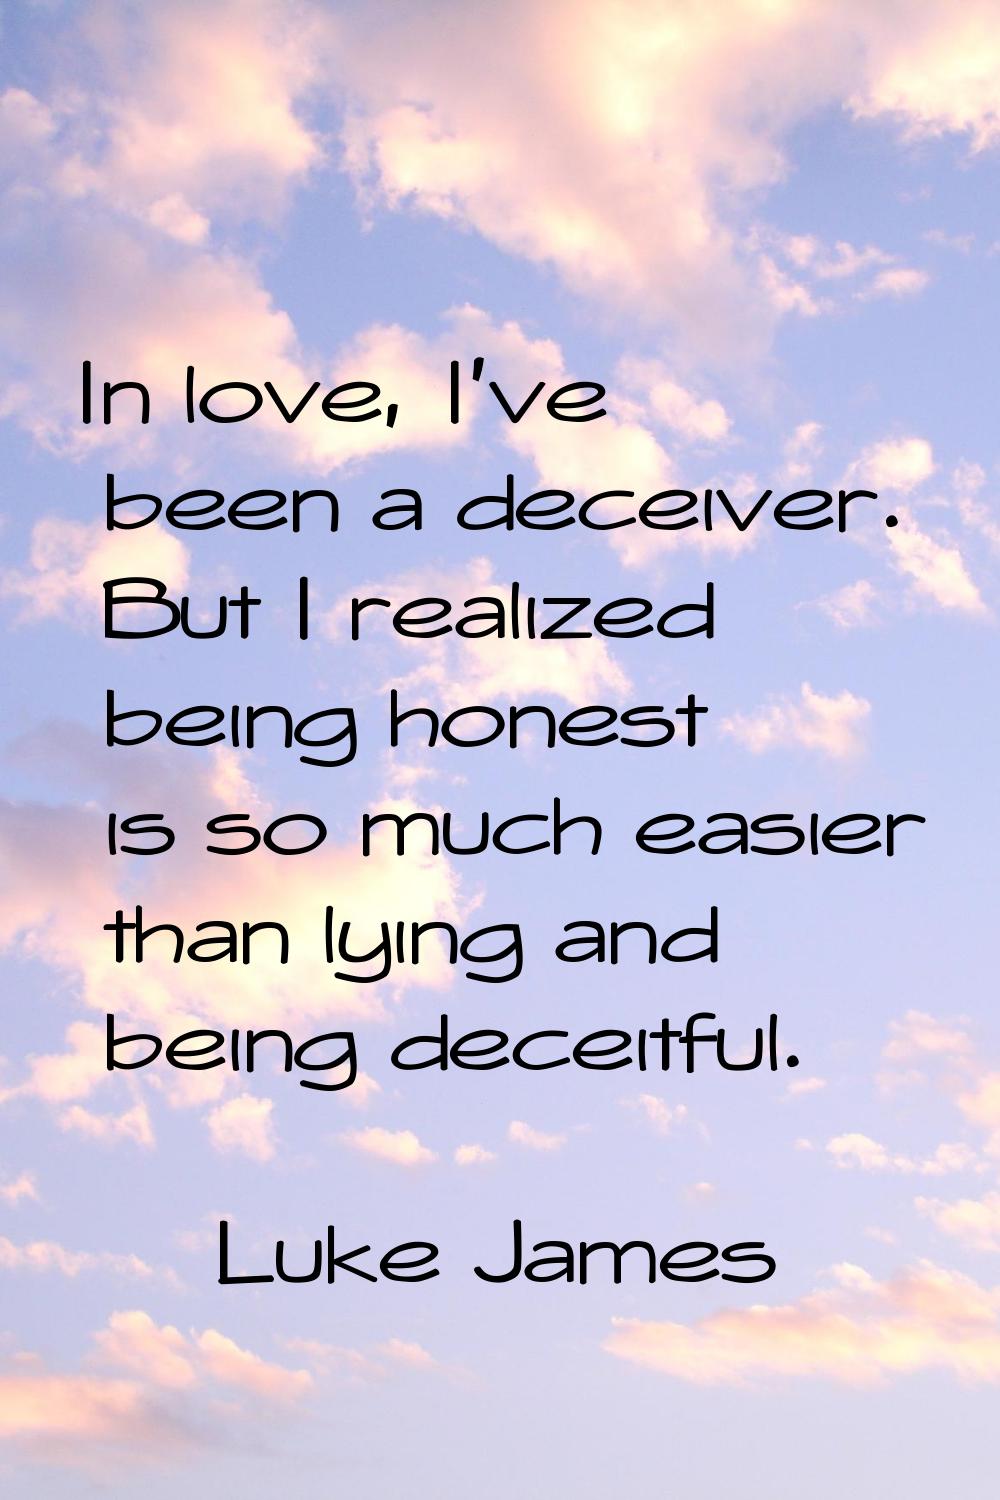 In love, I've been a deceiver. But I realized being honest is so much easier than lying and being d